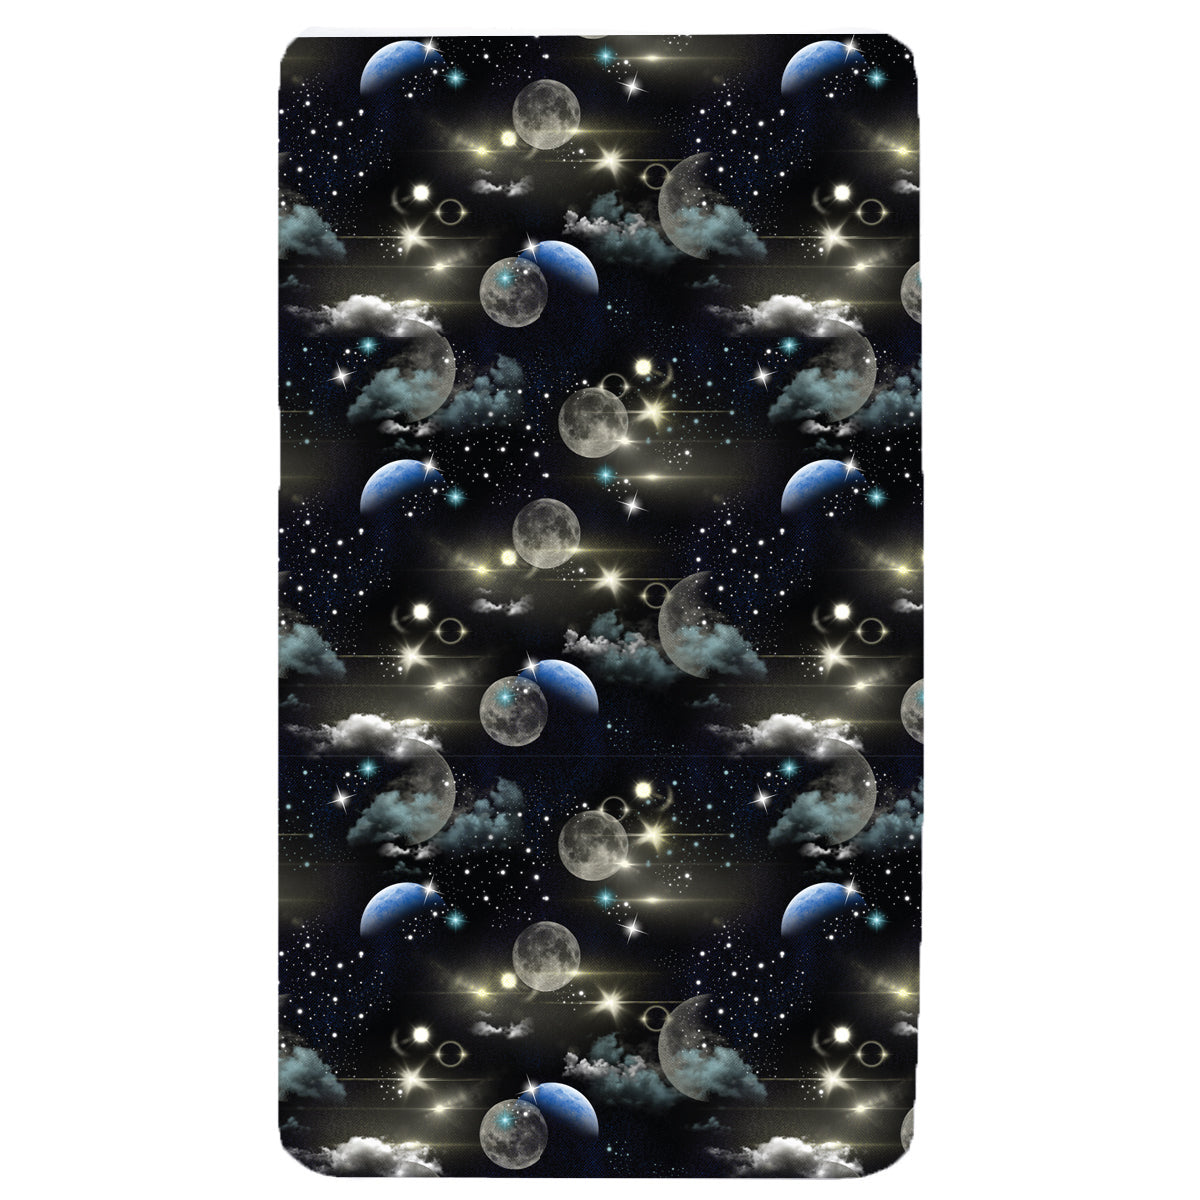 Astro - Sensory Fitted Bed Sheet